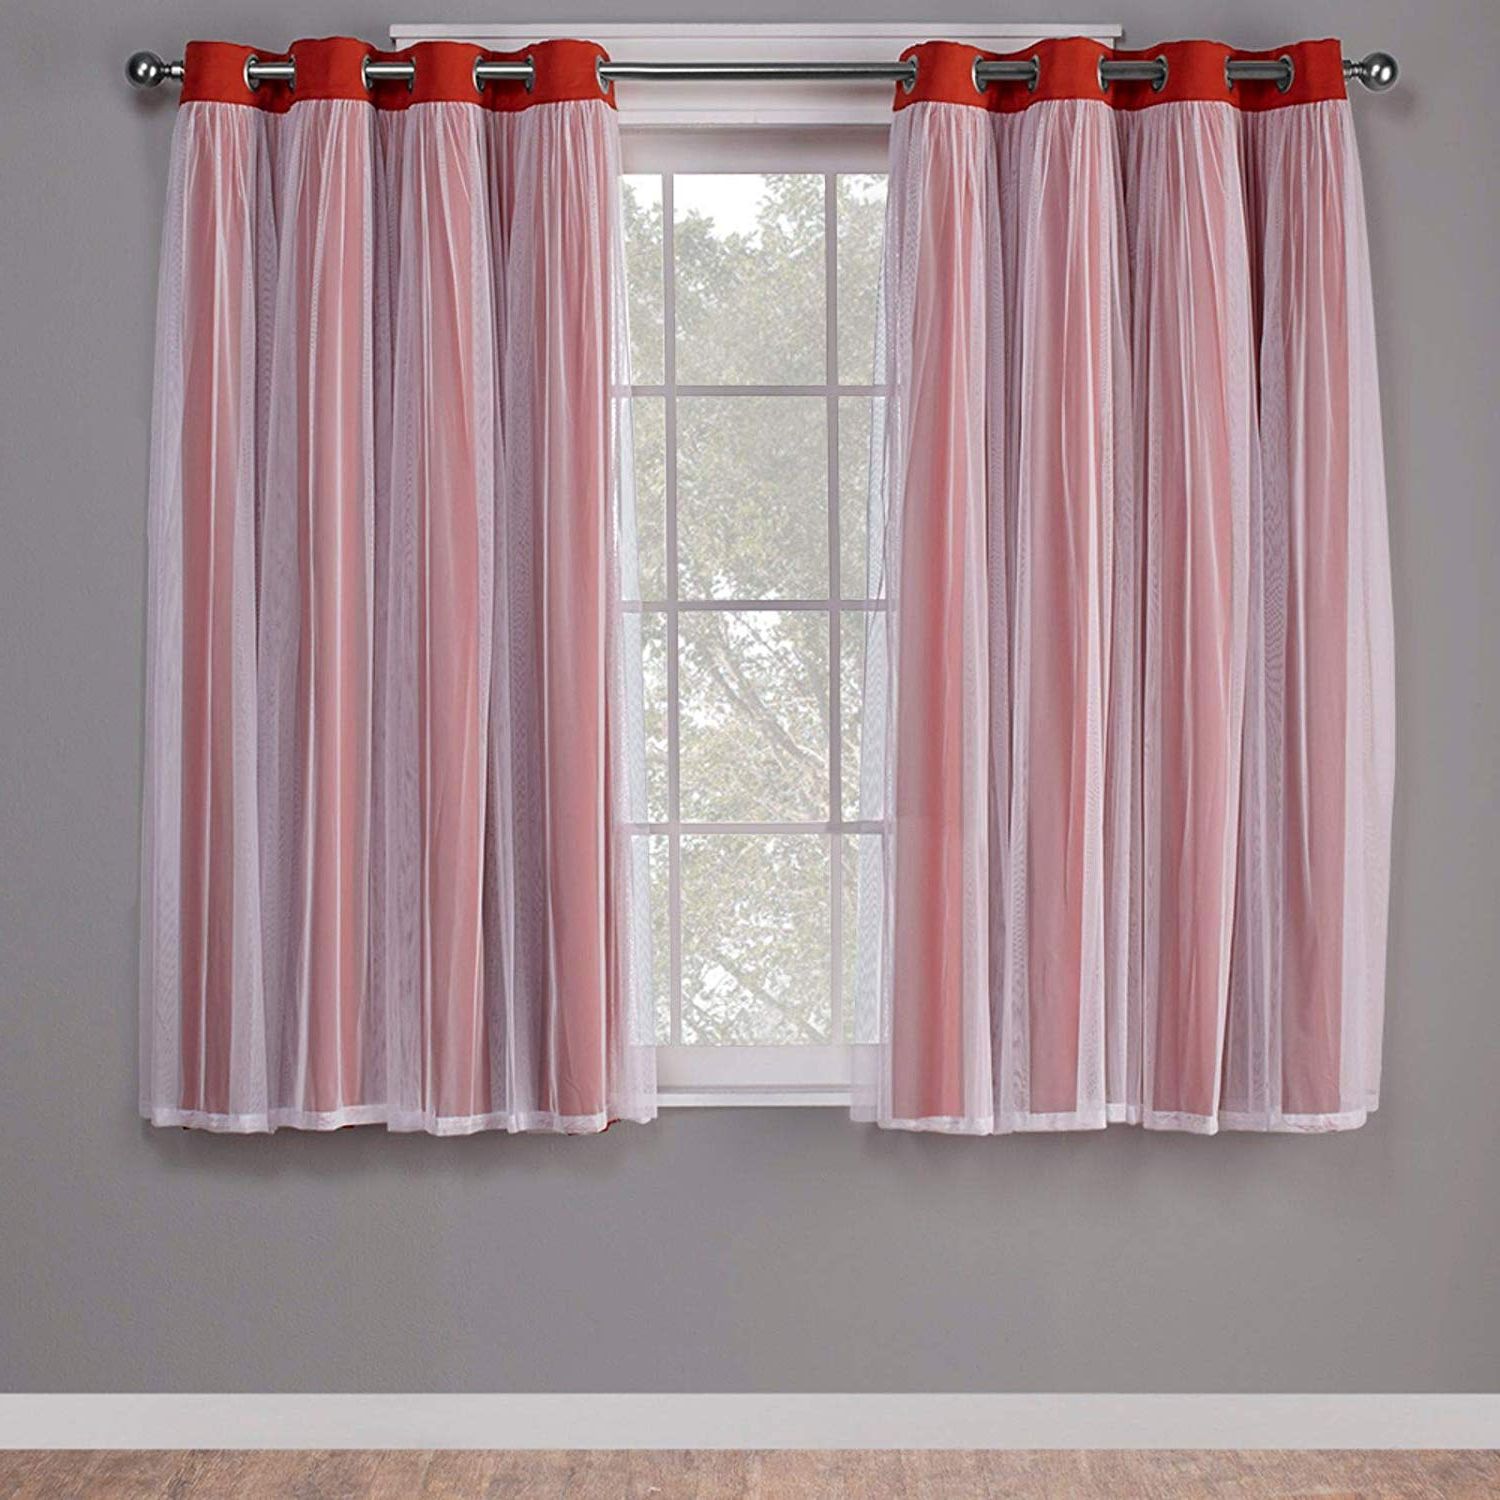 Catarina Layered Curtain Panel Pairs With Grommet Top Intended For Trendy Exclusive Home Curtains Catarina Layered Solid Blackout And Sheer Window  Curtain Panel Pair With Grommet Top, 52x63, Spicy Orange, 2 Piece (View 16 of 20)